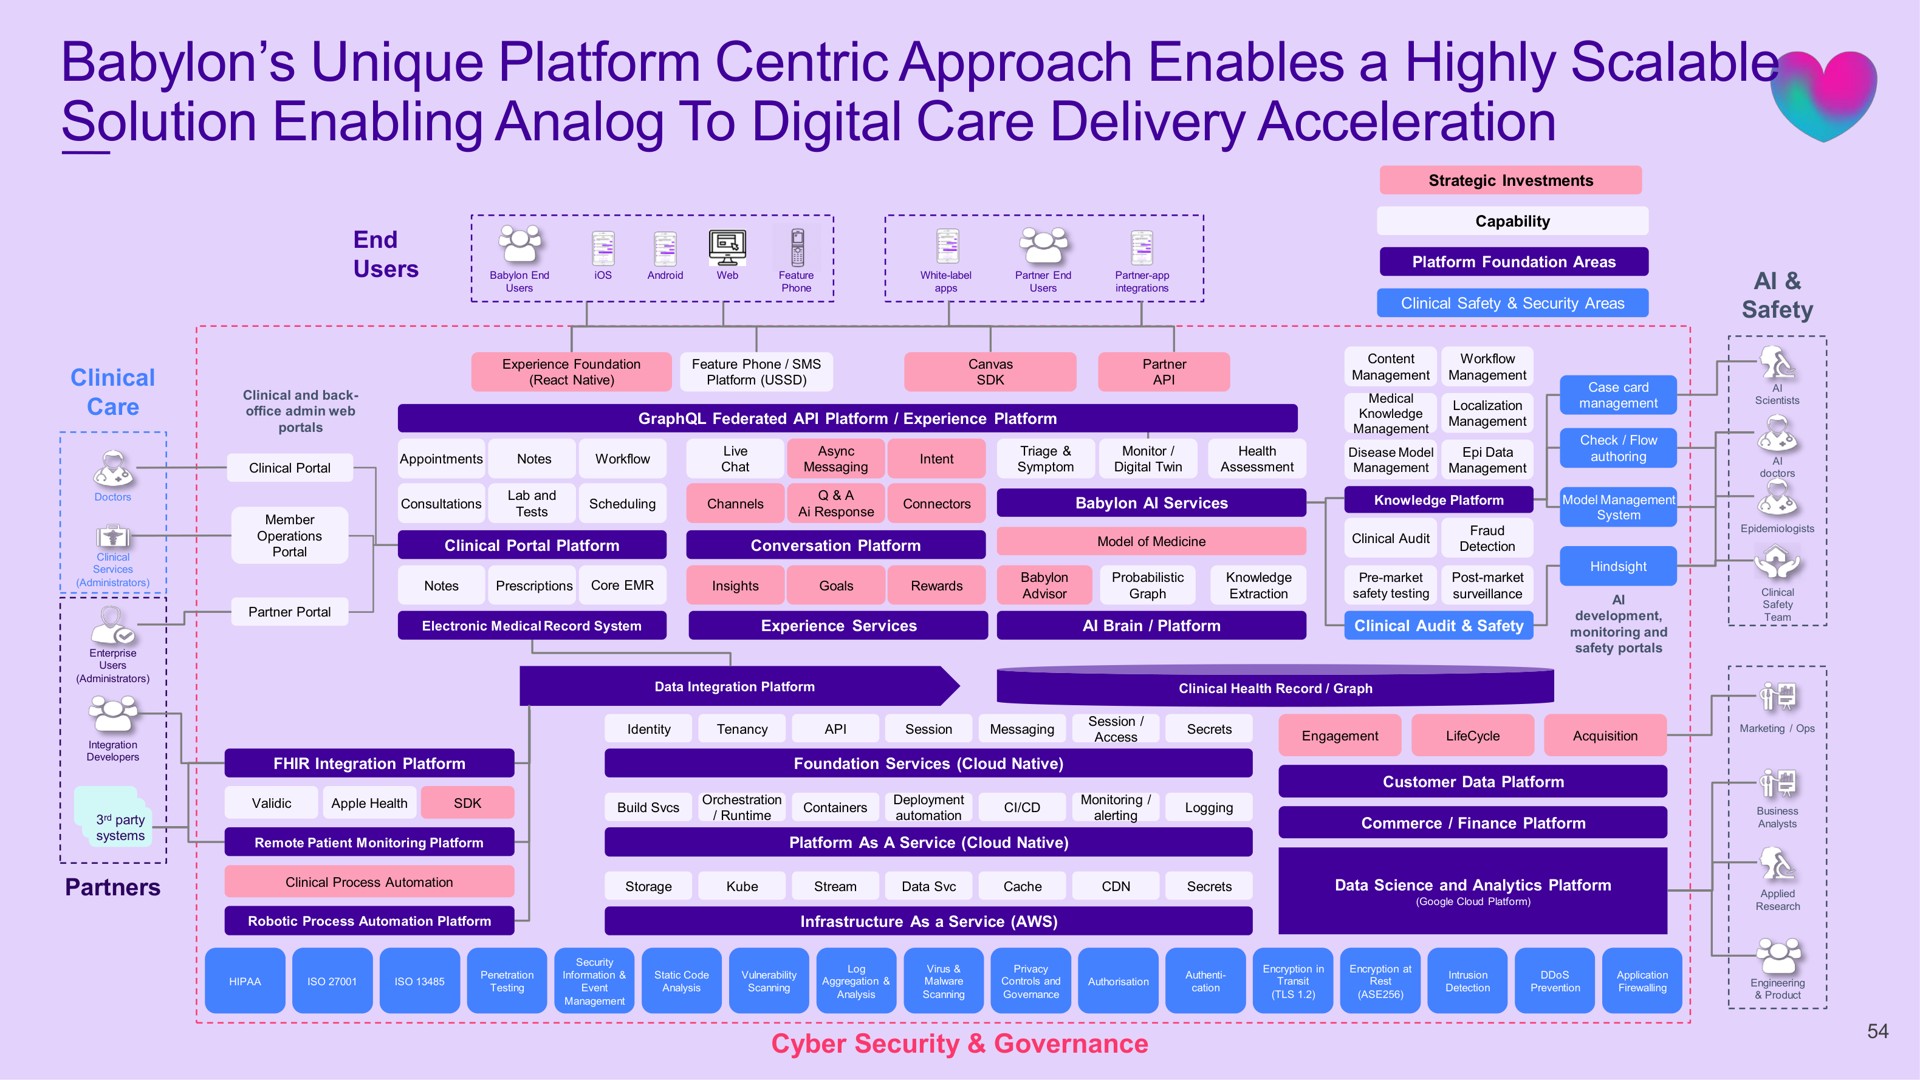 unique platform centric approach enables a highly scalable solution enabling to digital care delivery acceleration | Babylon